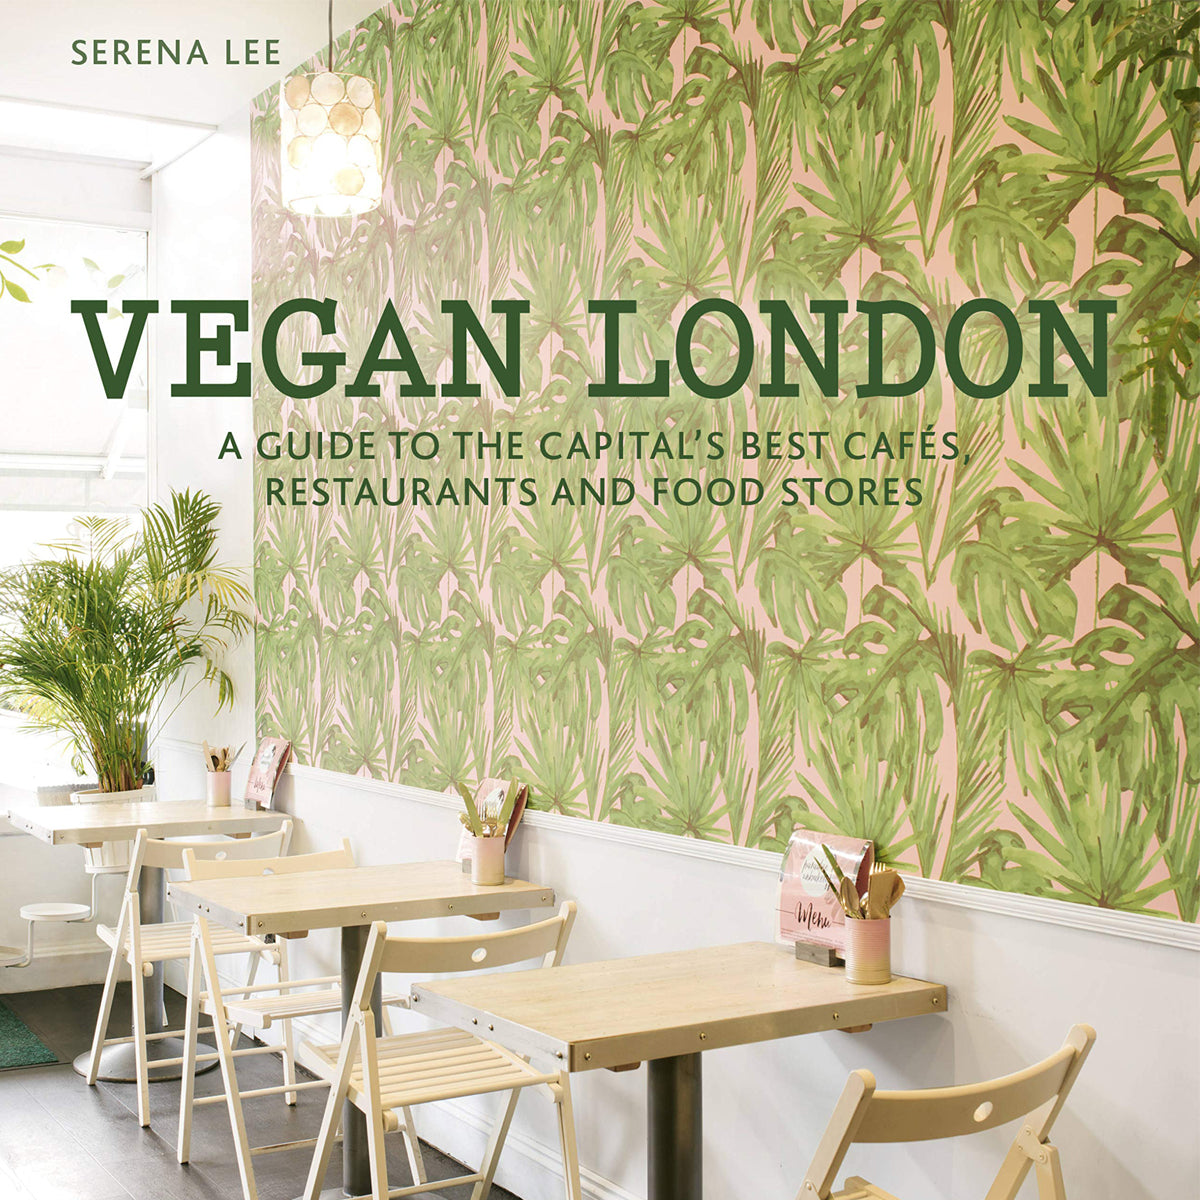 Vegan London: A Guide To The Capital's Best Cafés, Restaurants And Food Stores Book by Serena Lee